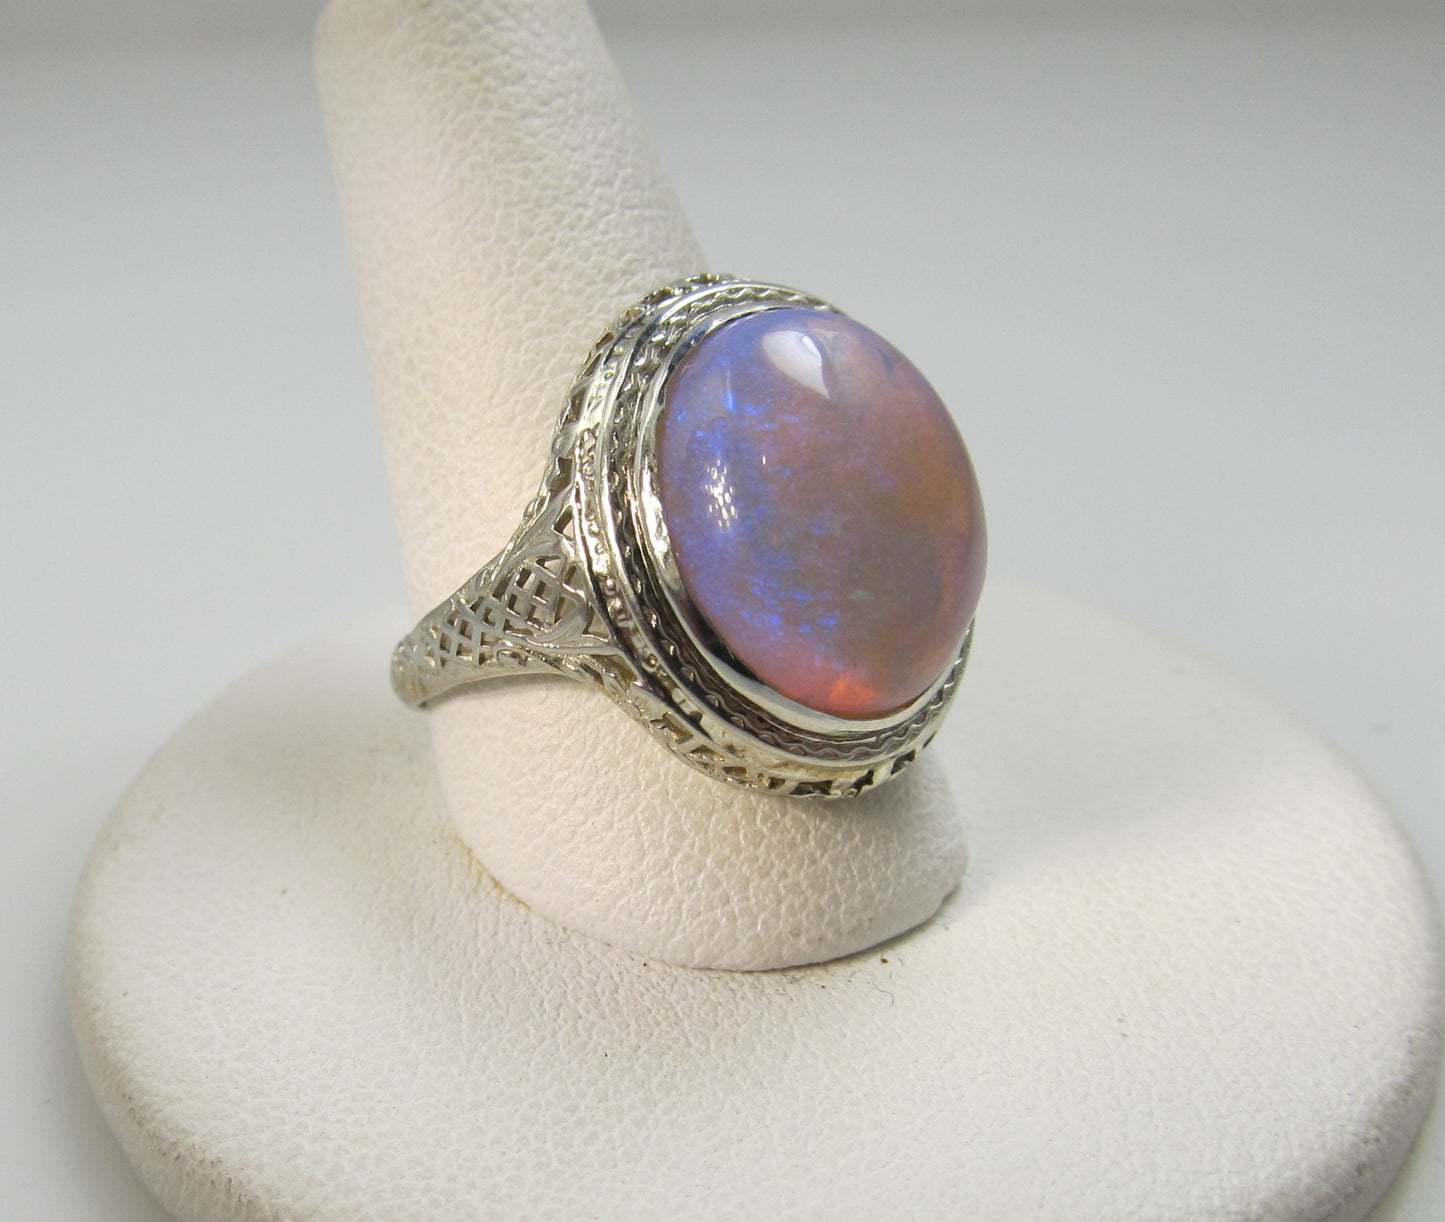 14k White Gold Filigree Ring With A 5.50ct Opal, Circa 1920